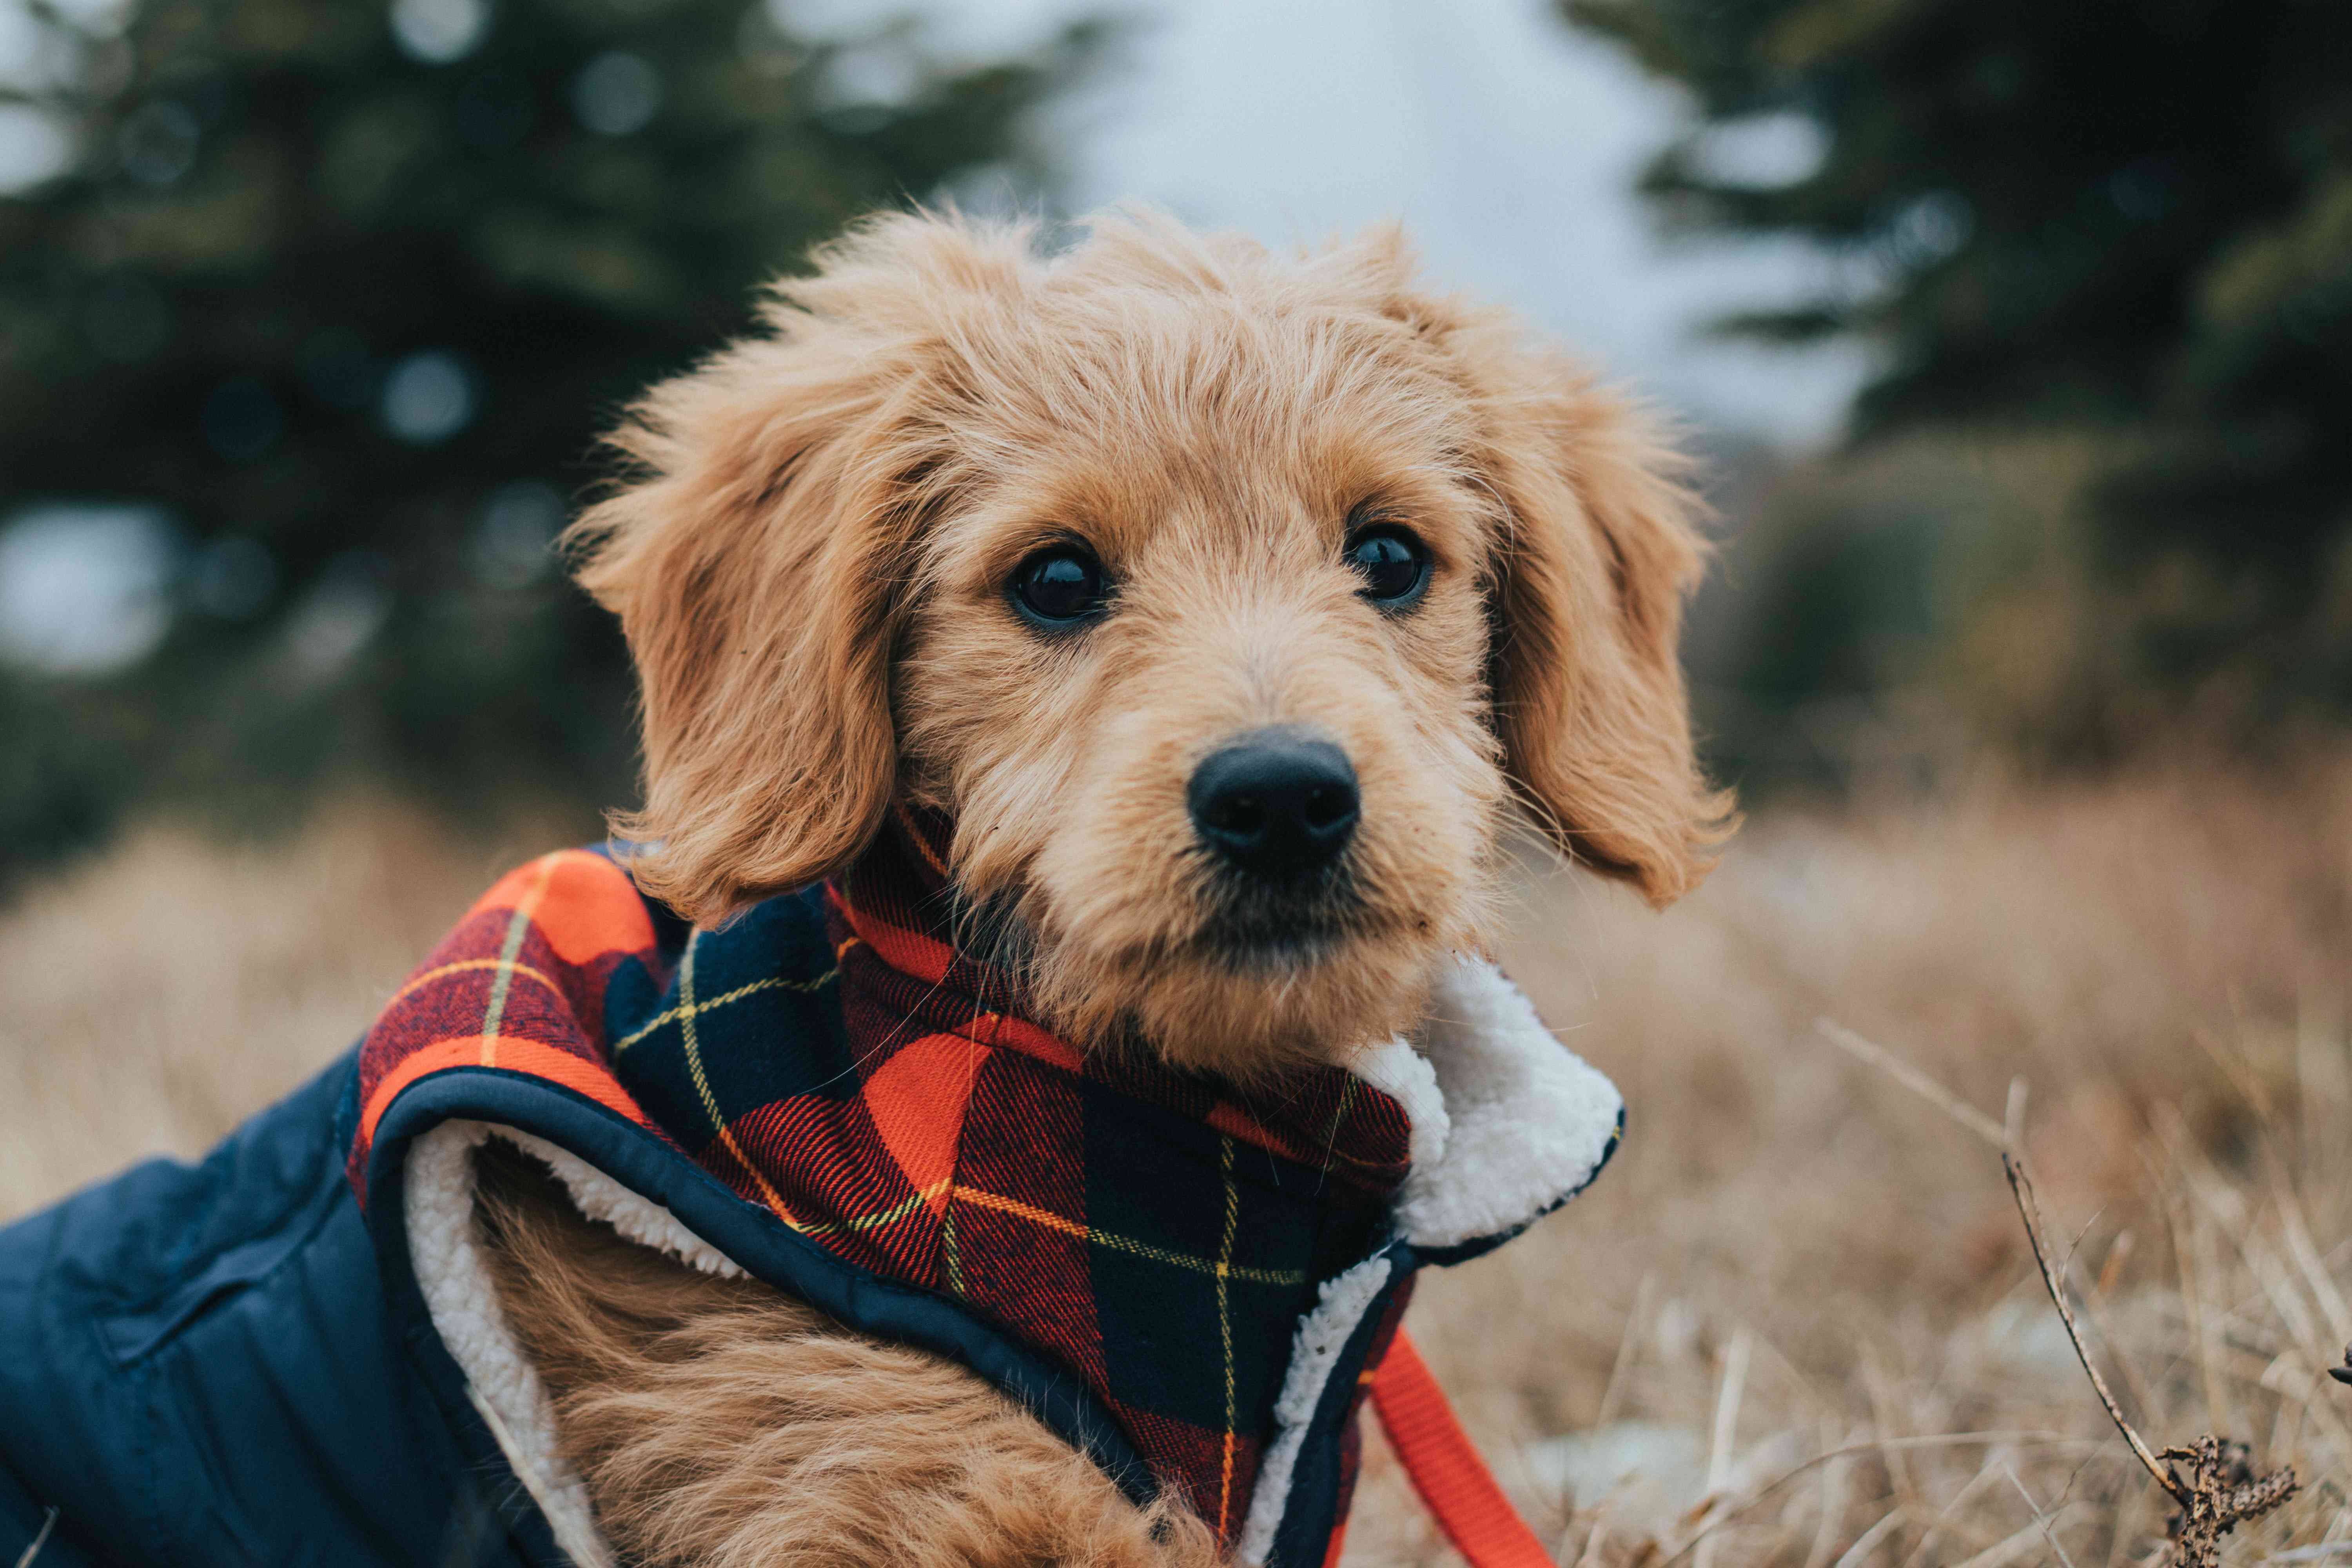 City vs Country: Which Is Better for Goldendoodles? - A Guide to Choosing the Best Living Environment for Your Furry Friend